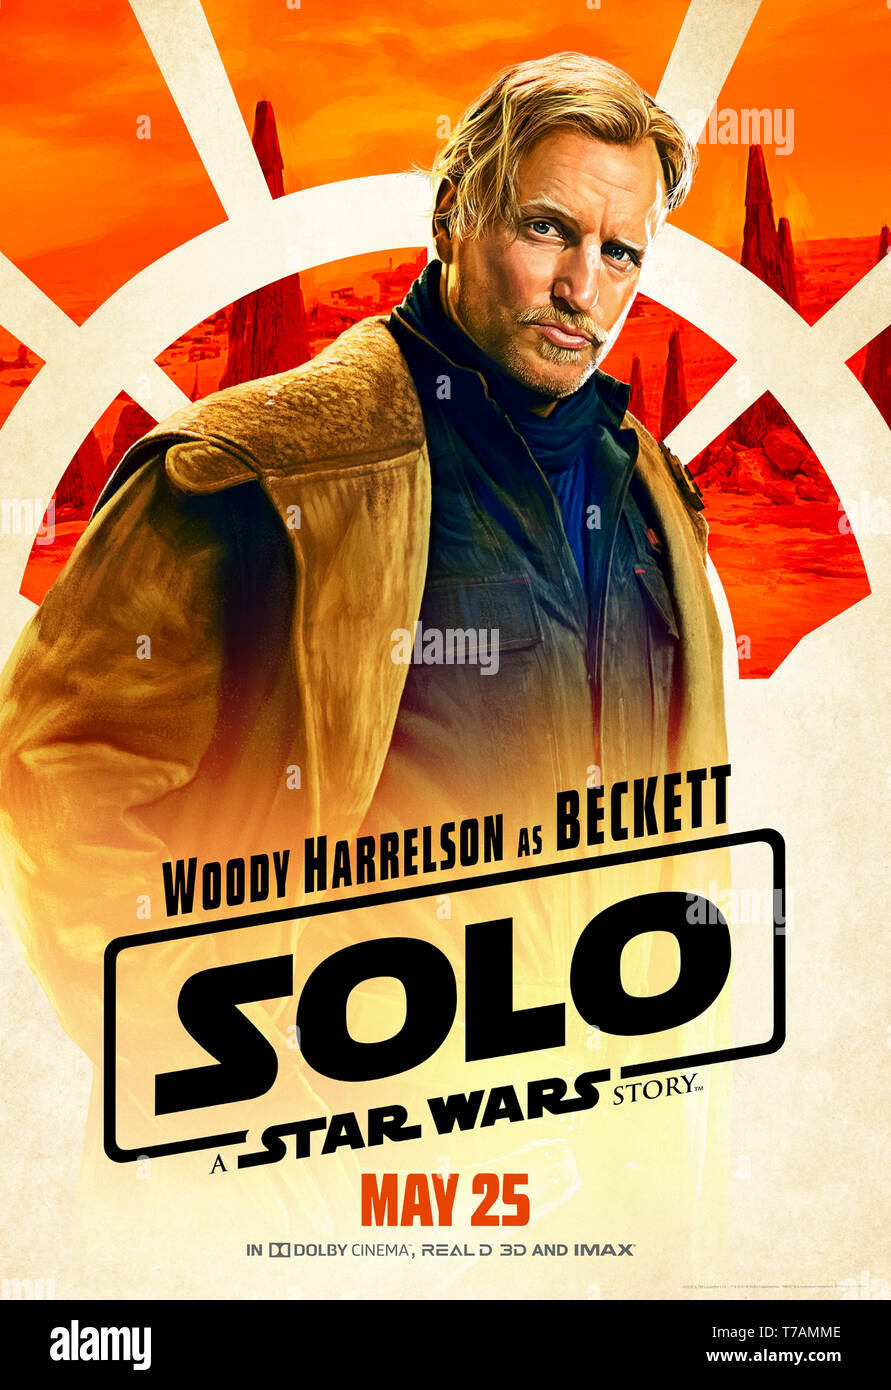 Solo: A Star Wars Story (2018) directed by Ron Howard and starring Woody Harrelson as Beckett. Stock Photo